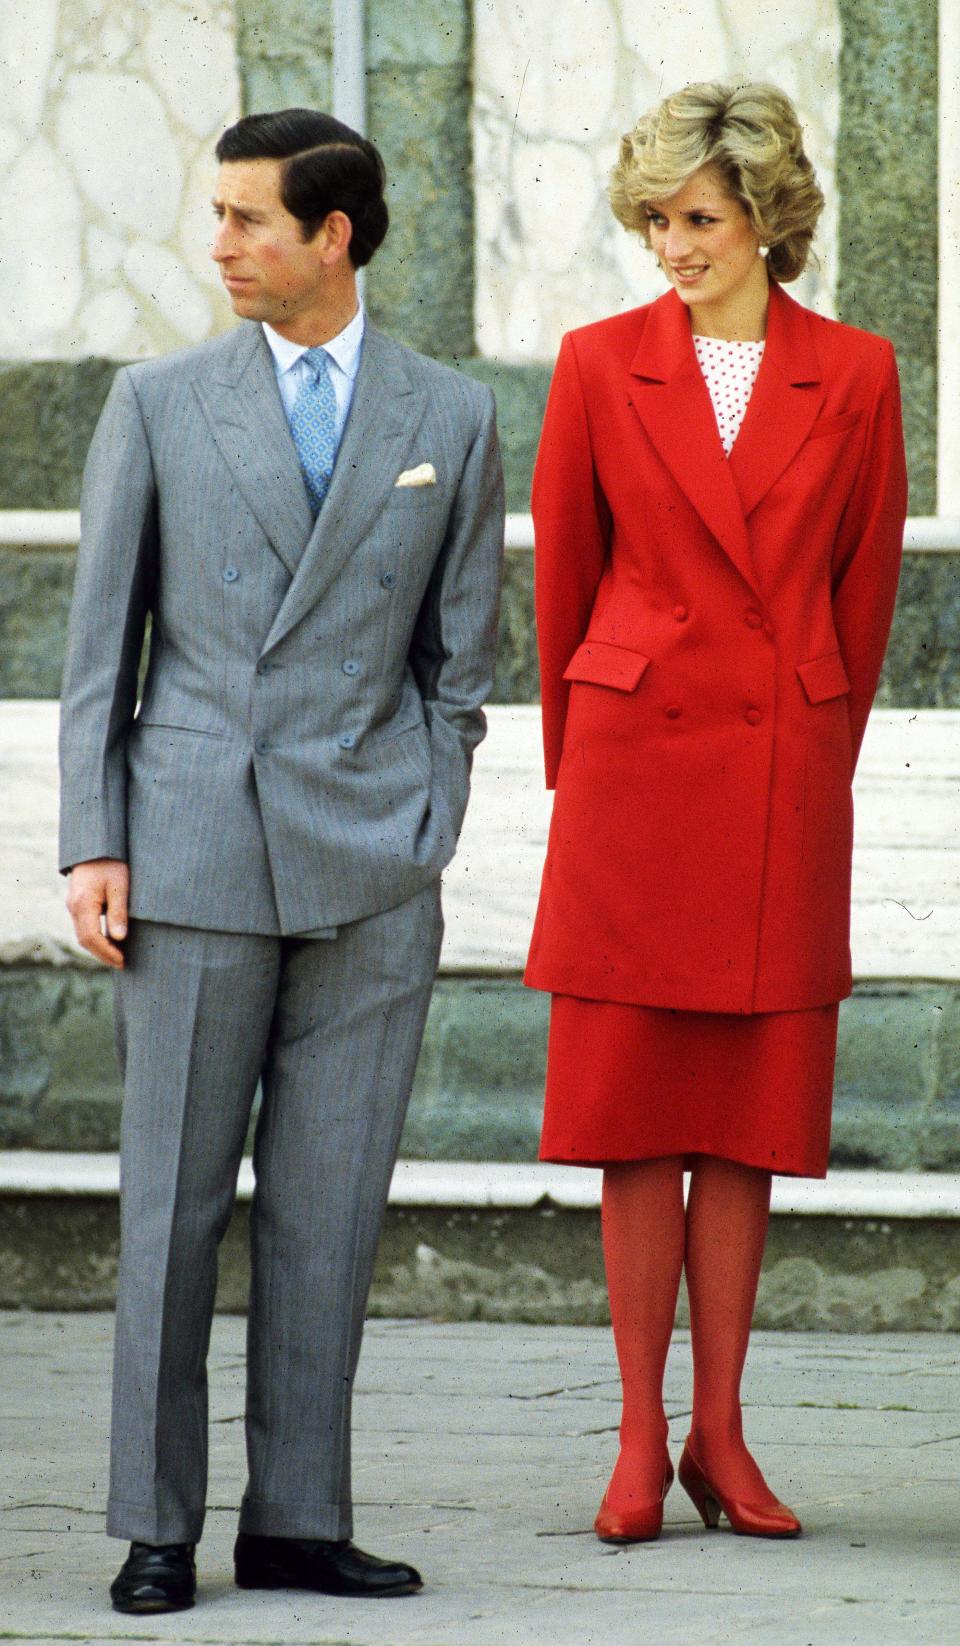 Princess Diana with Prince Charles in Florence. He is wearing a. grey mens suit, she is wearing a long red jacket, red skirt, red tights and red shoes, with a red and white polka dot top.